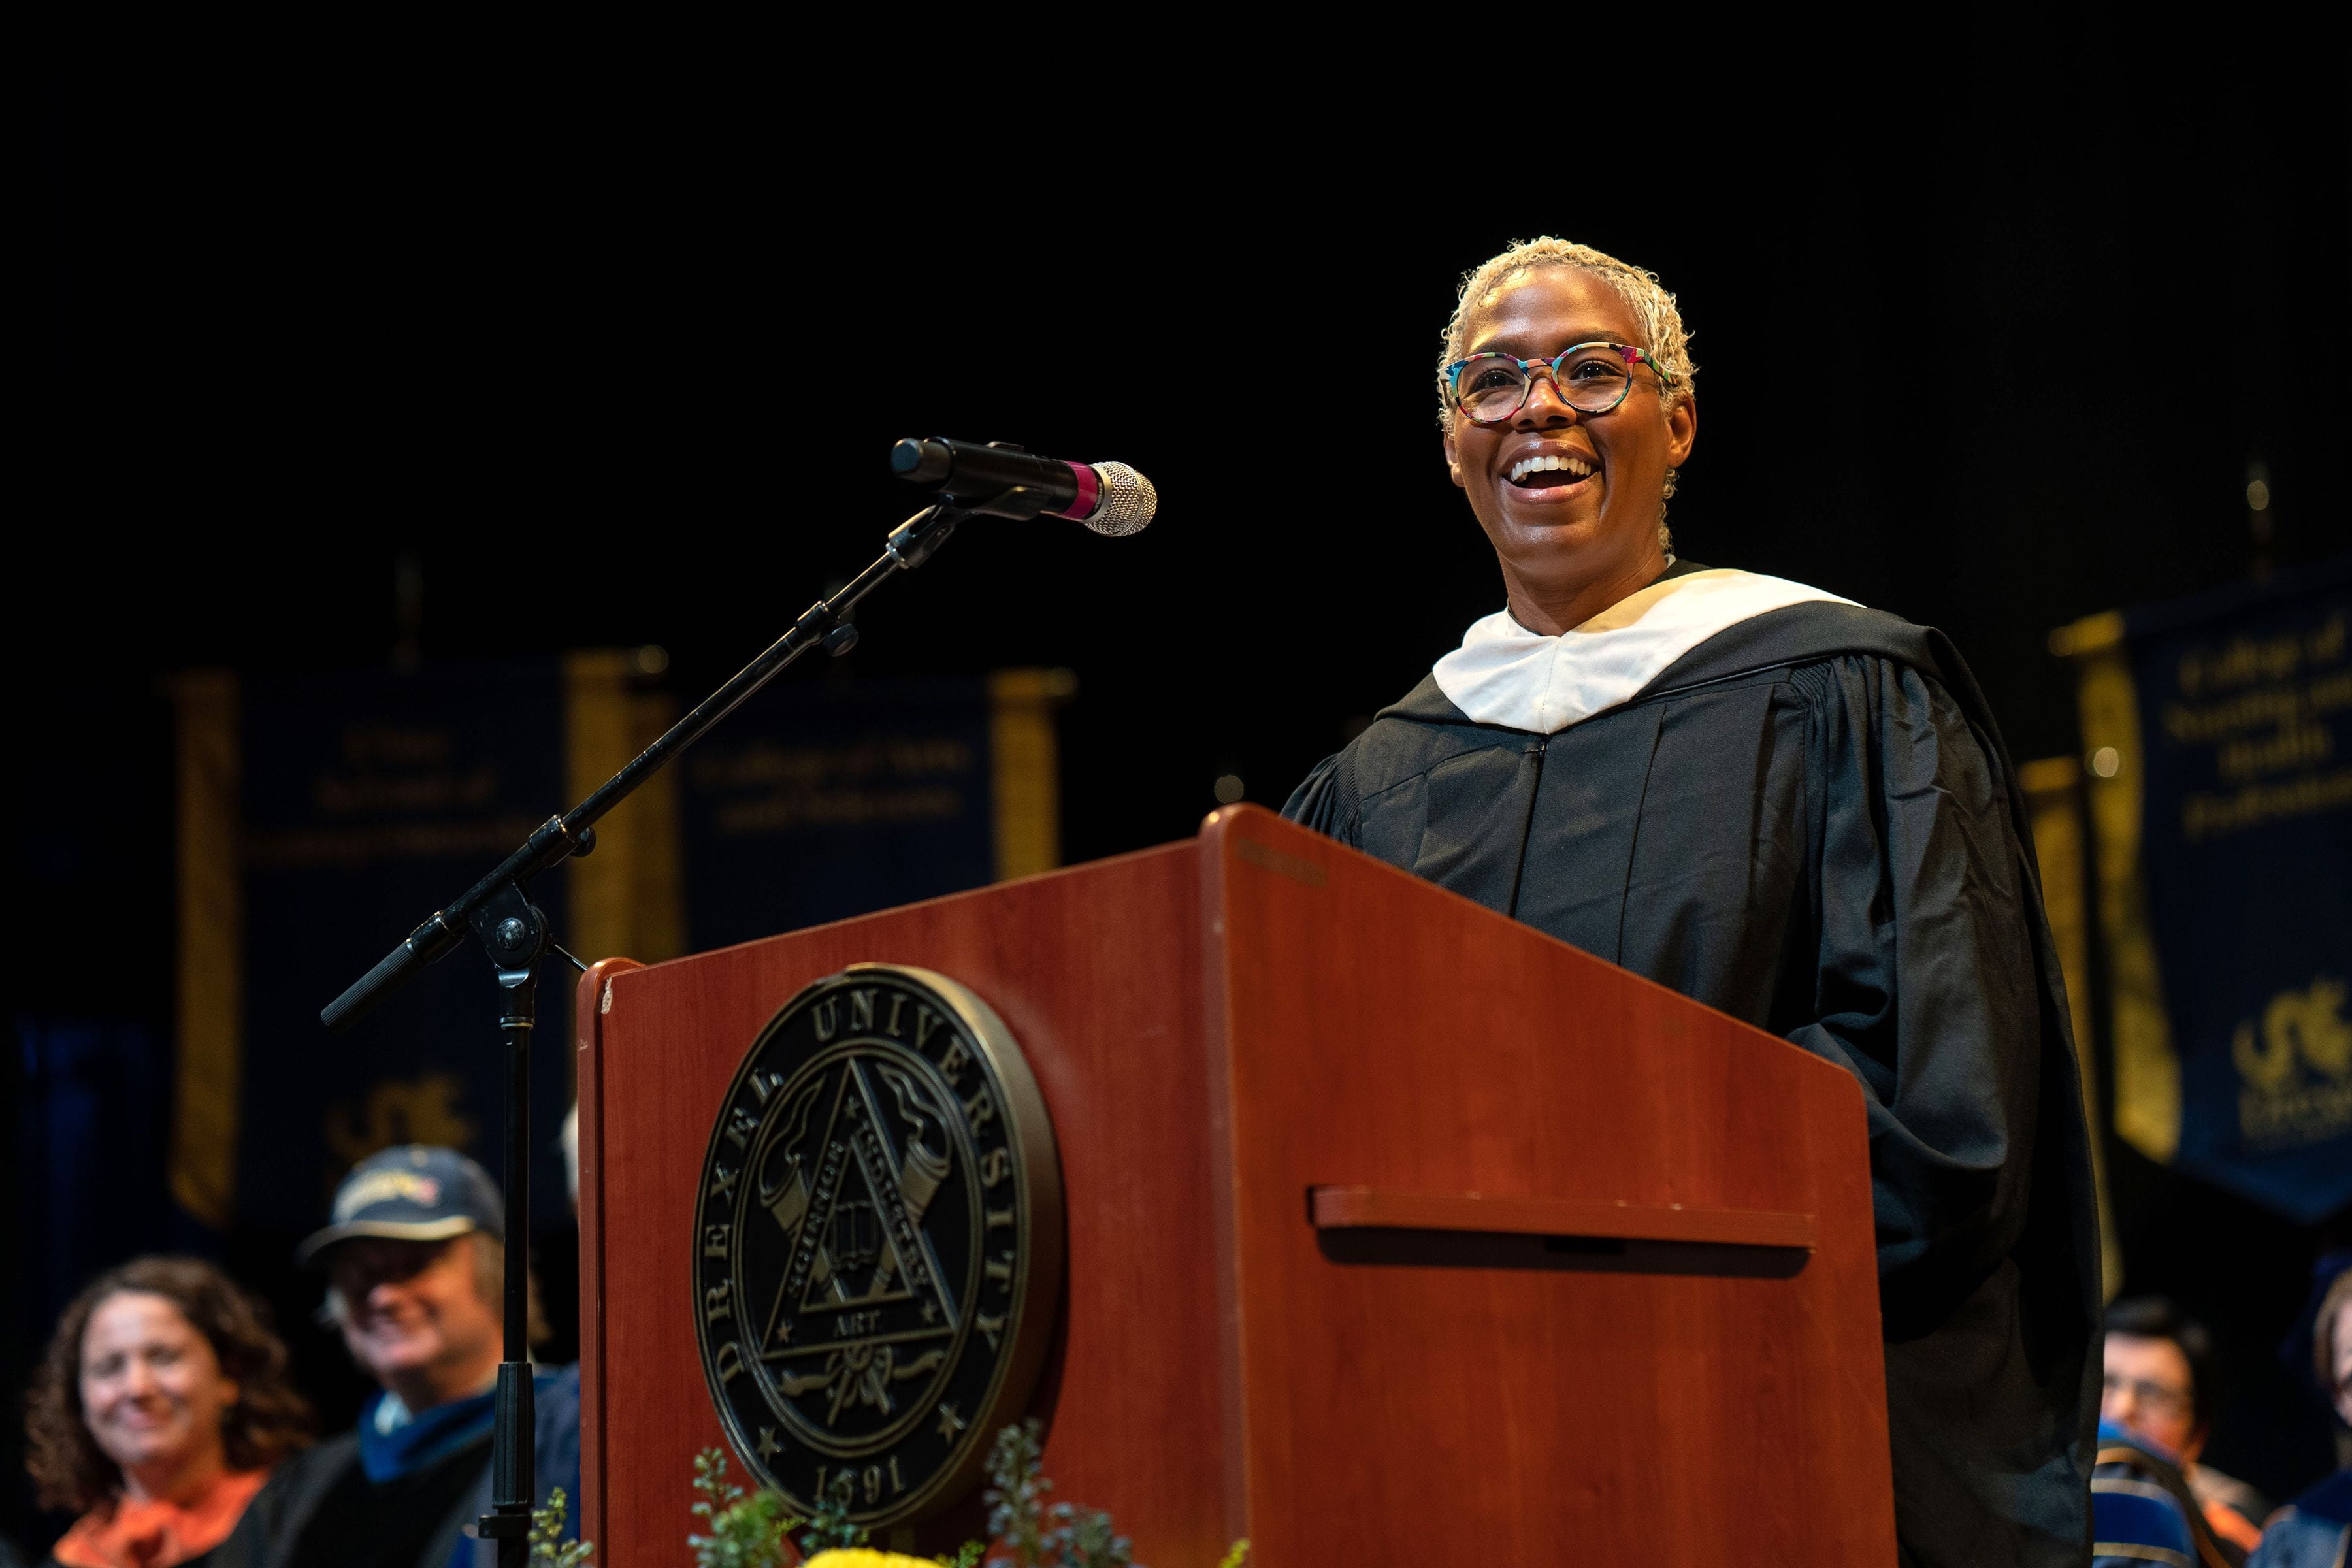 Raja Schaar stands at the podium at Drexel's 2022 Convocation ceremony. Photo credit: Shira Yudkoff Photography.